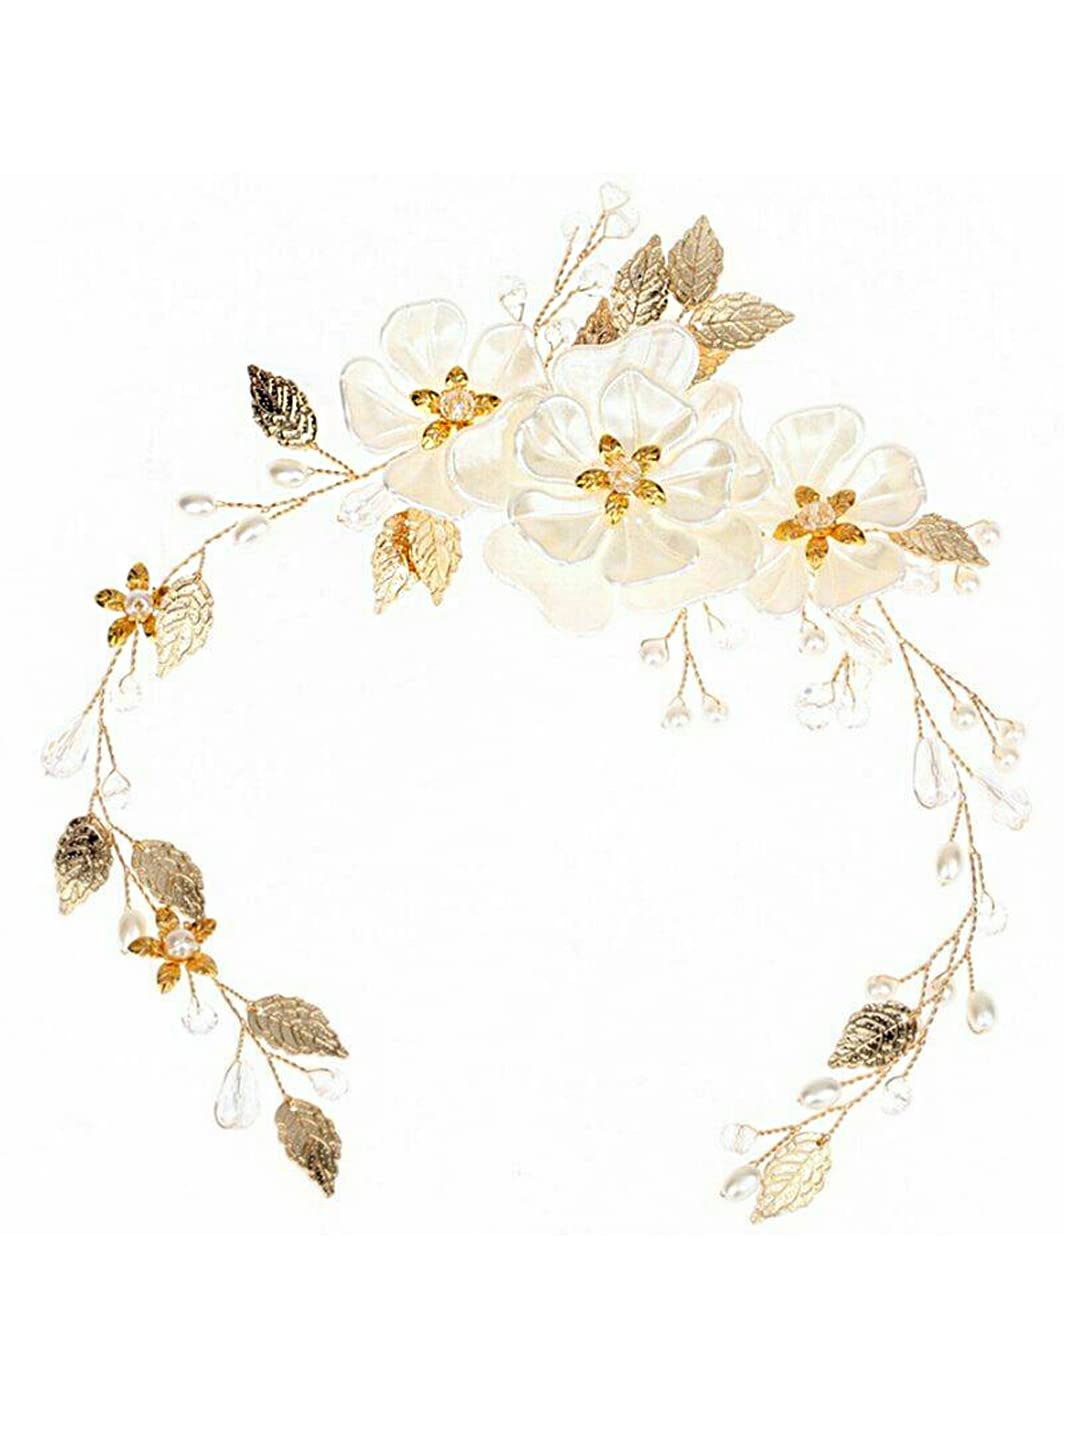 Yellow Chimes Bridal Hair Vine for Women and Girls Bridal Hair Accessories for Wedding Golden Headband Hair Accessories Wedding Jewellery for Women Floral White Bridal Wedding Head band Hair Vine for Girls Headpiece